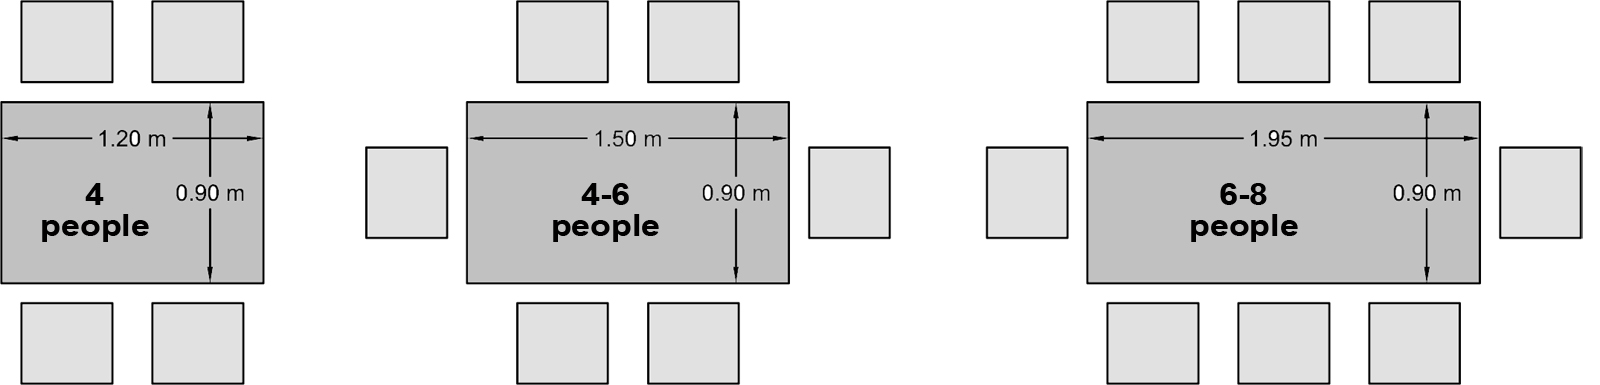 Standard Dimensions Of 6 Seater Dining, Standard Dimensions Of A Dining Room